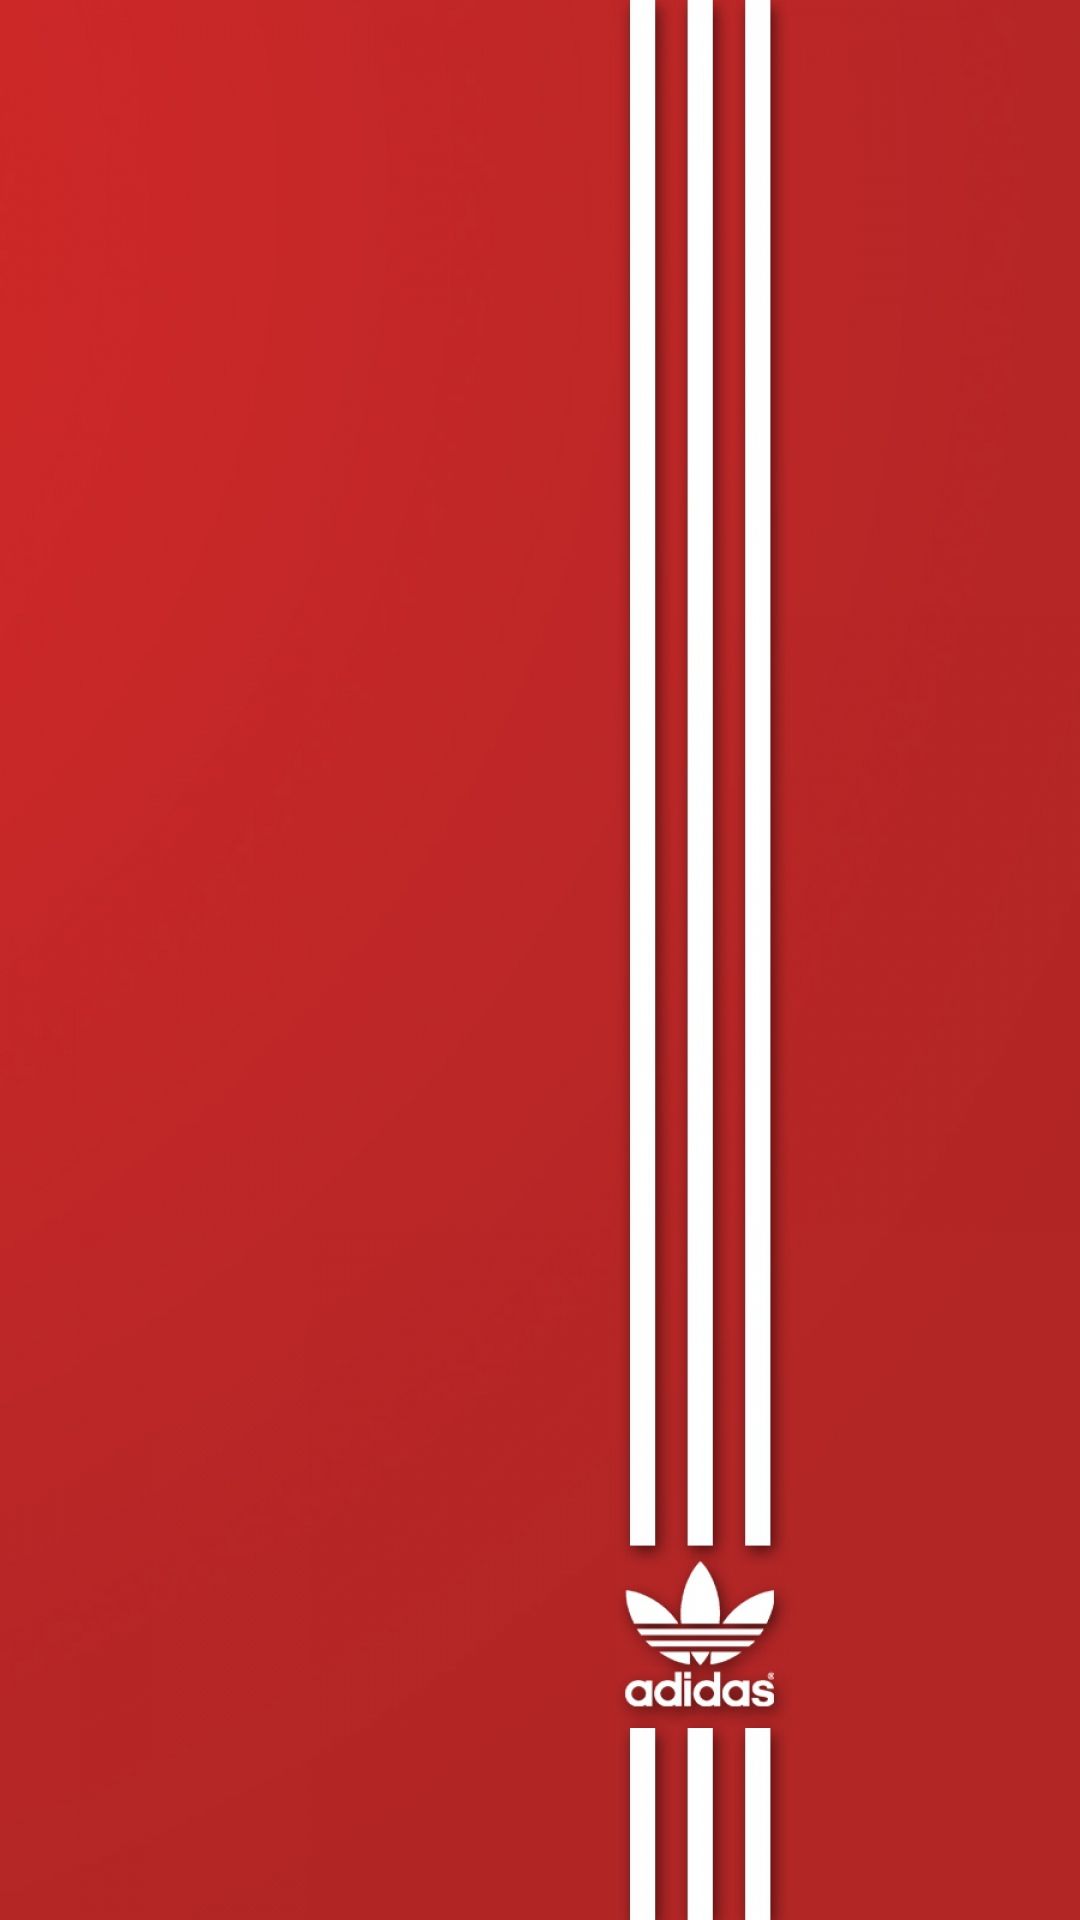 Adidas Iphone HD Wallpapers